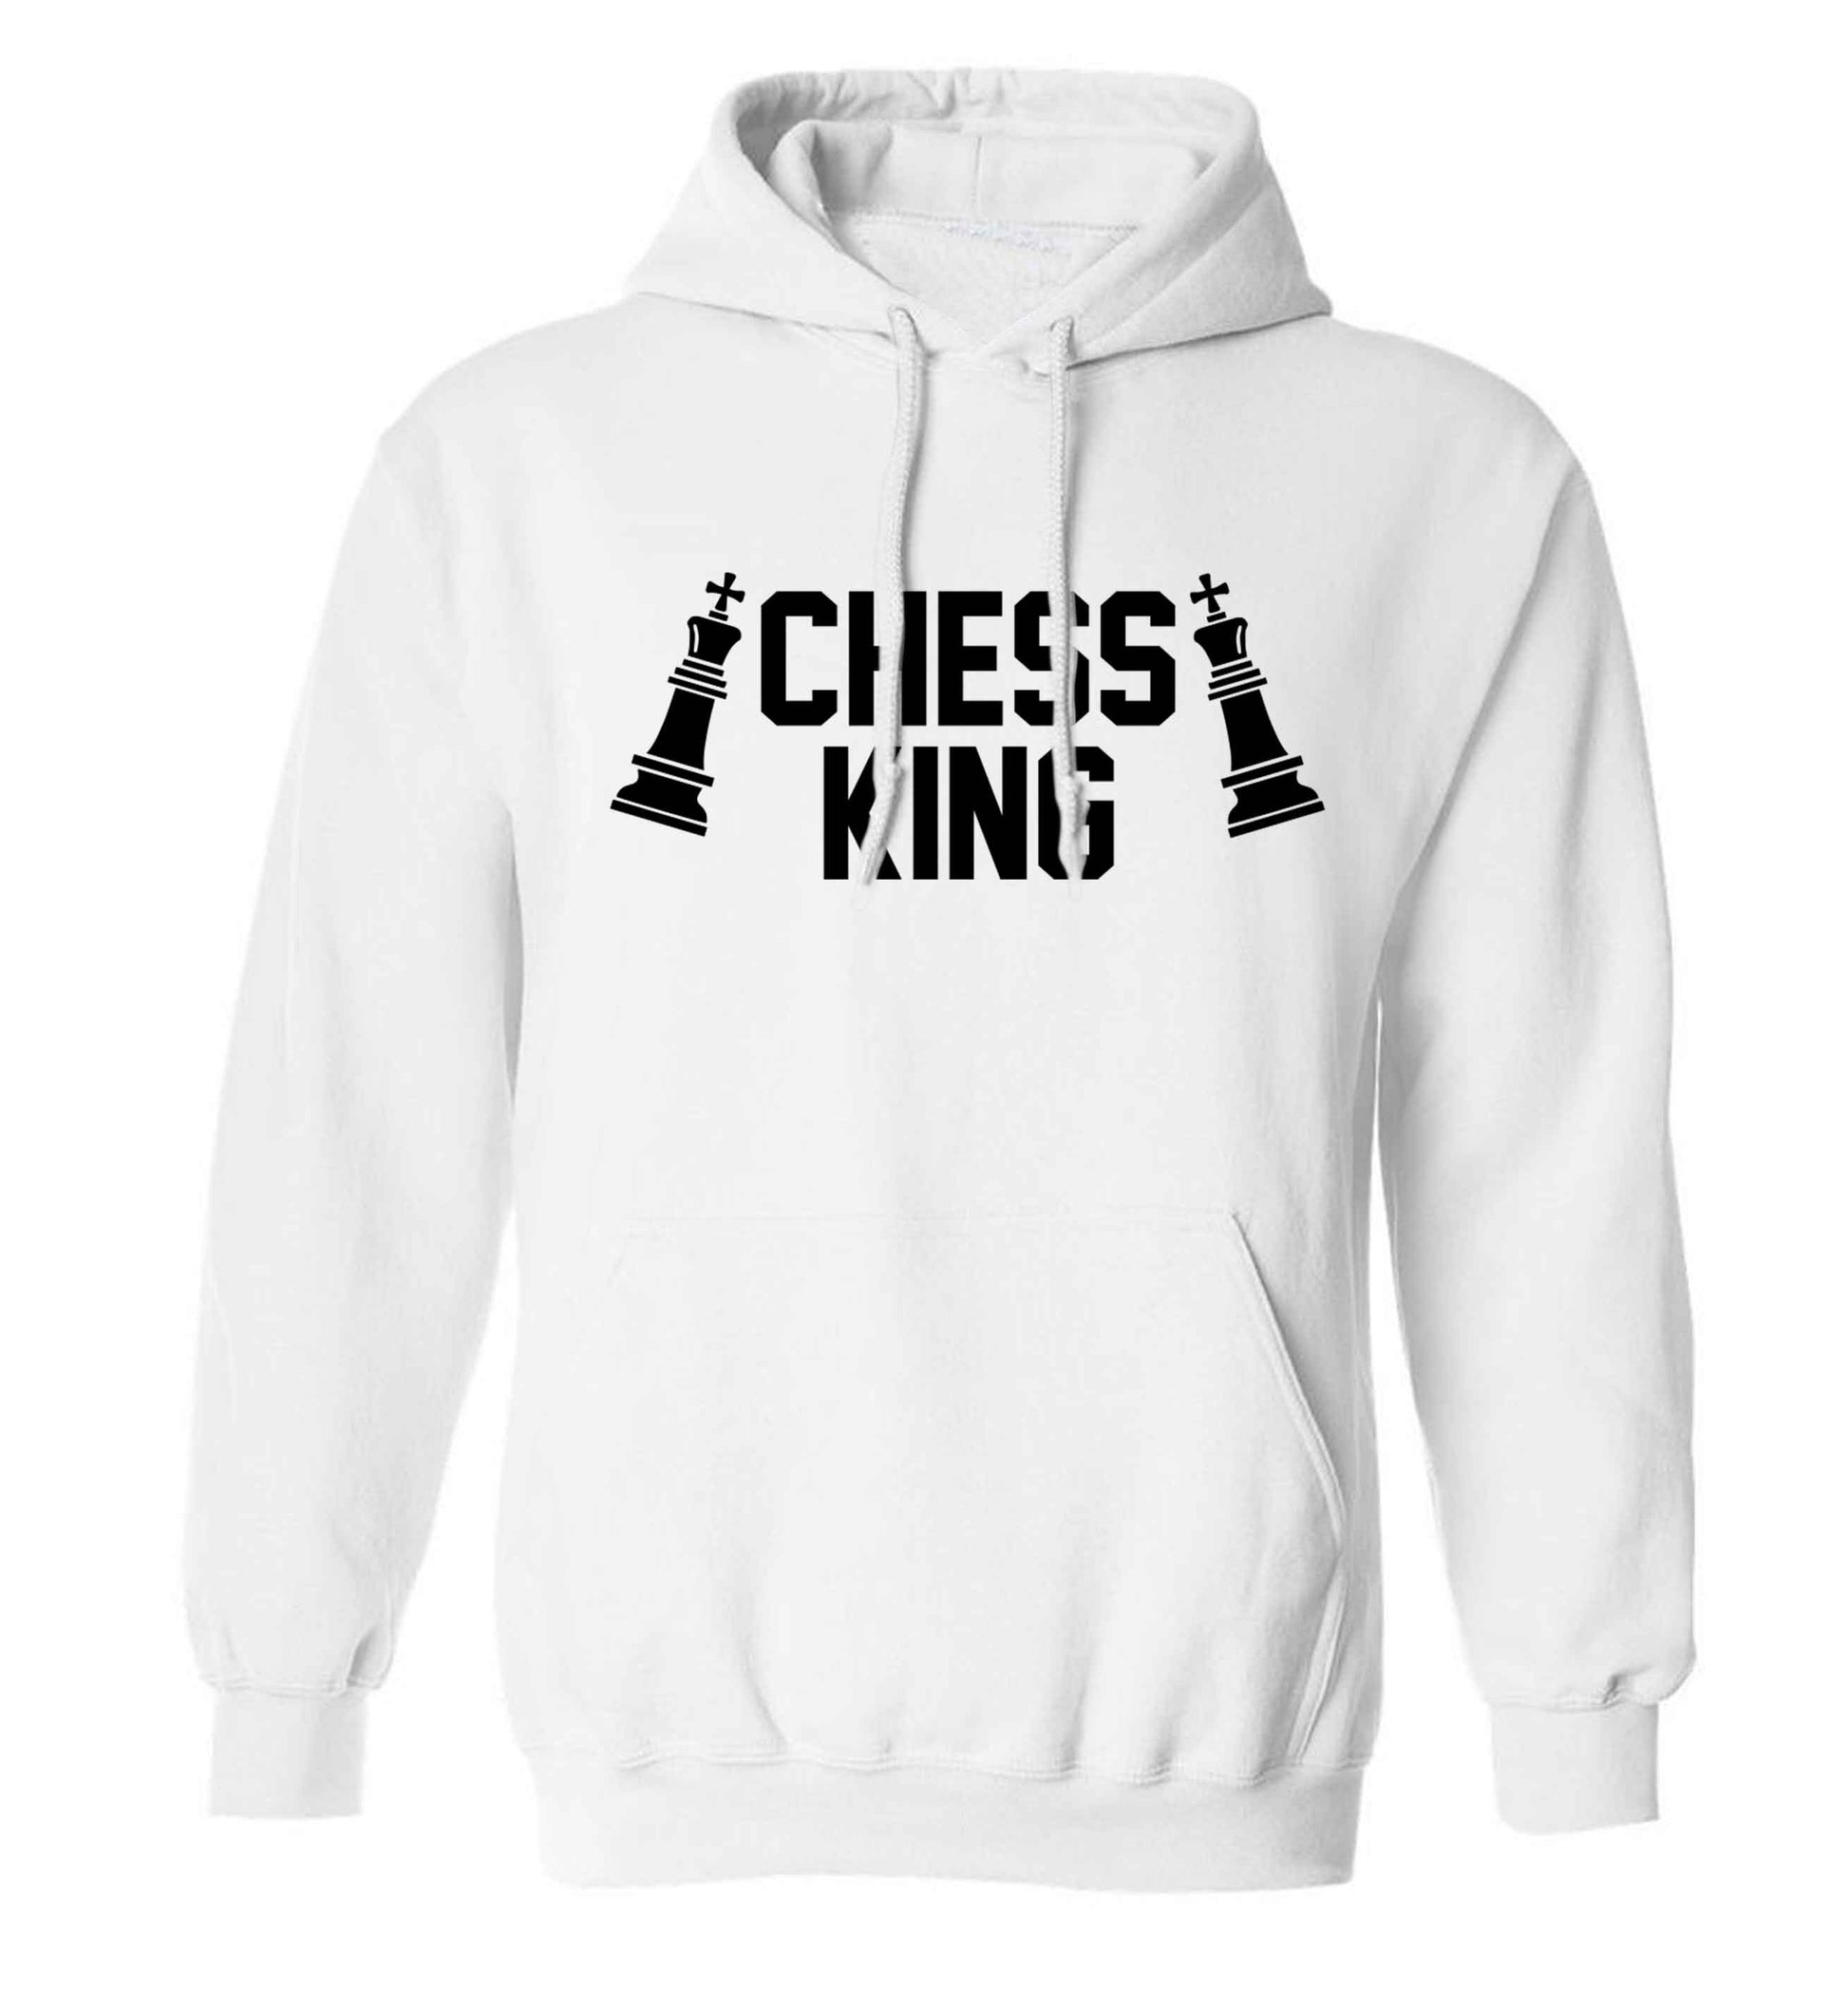 Chess king adults unisex white hoodie 2XL